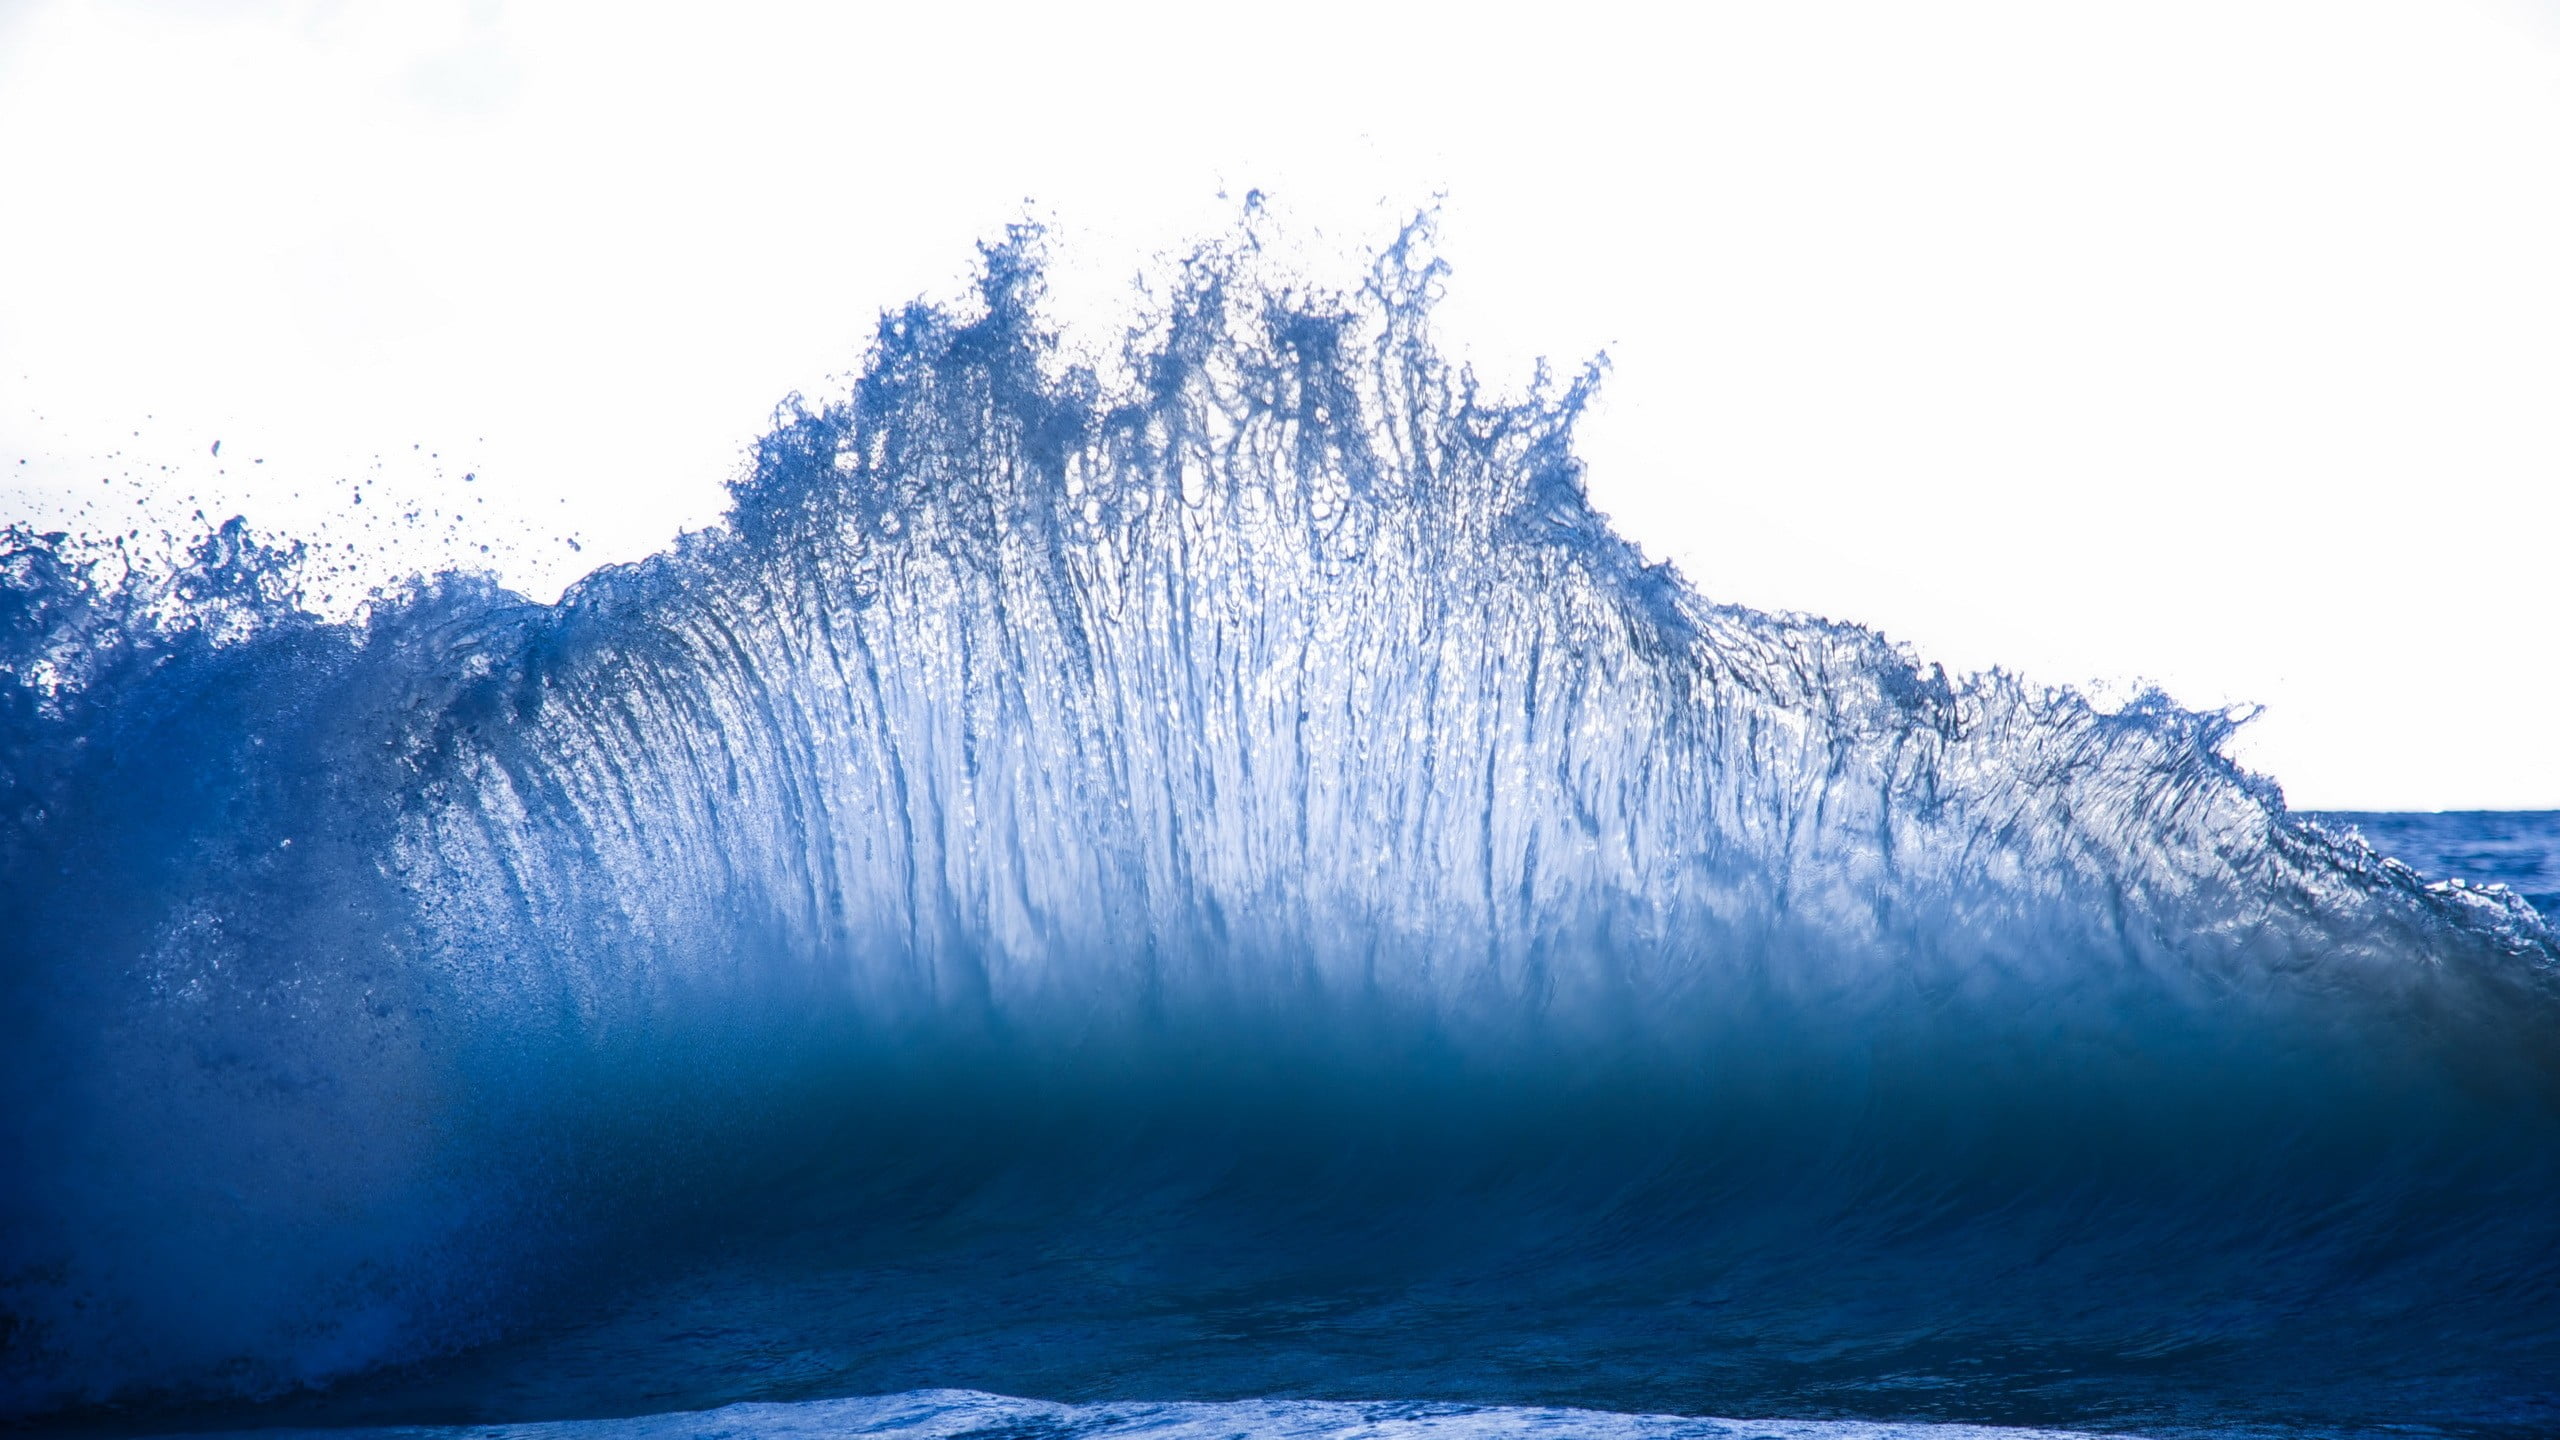 ocean waves, water, blue, beauty in nature, scenics - nature